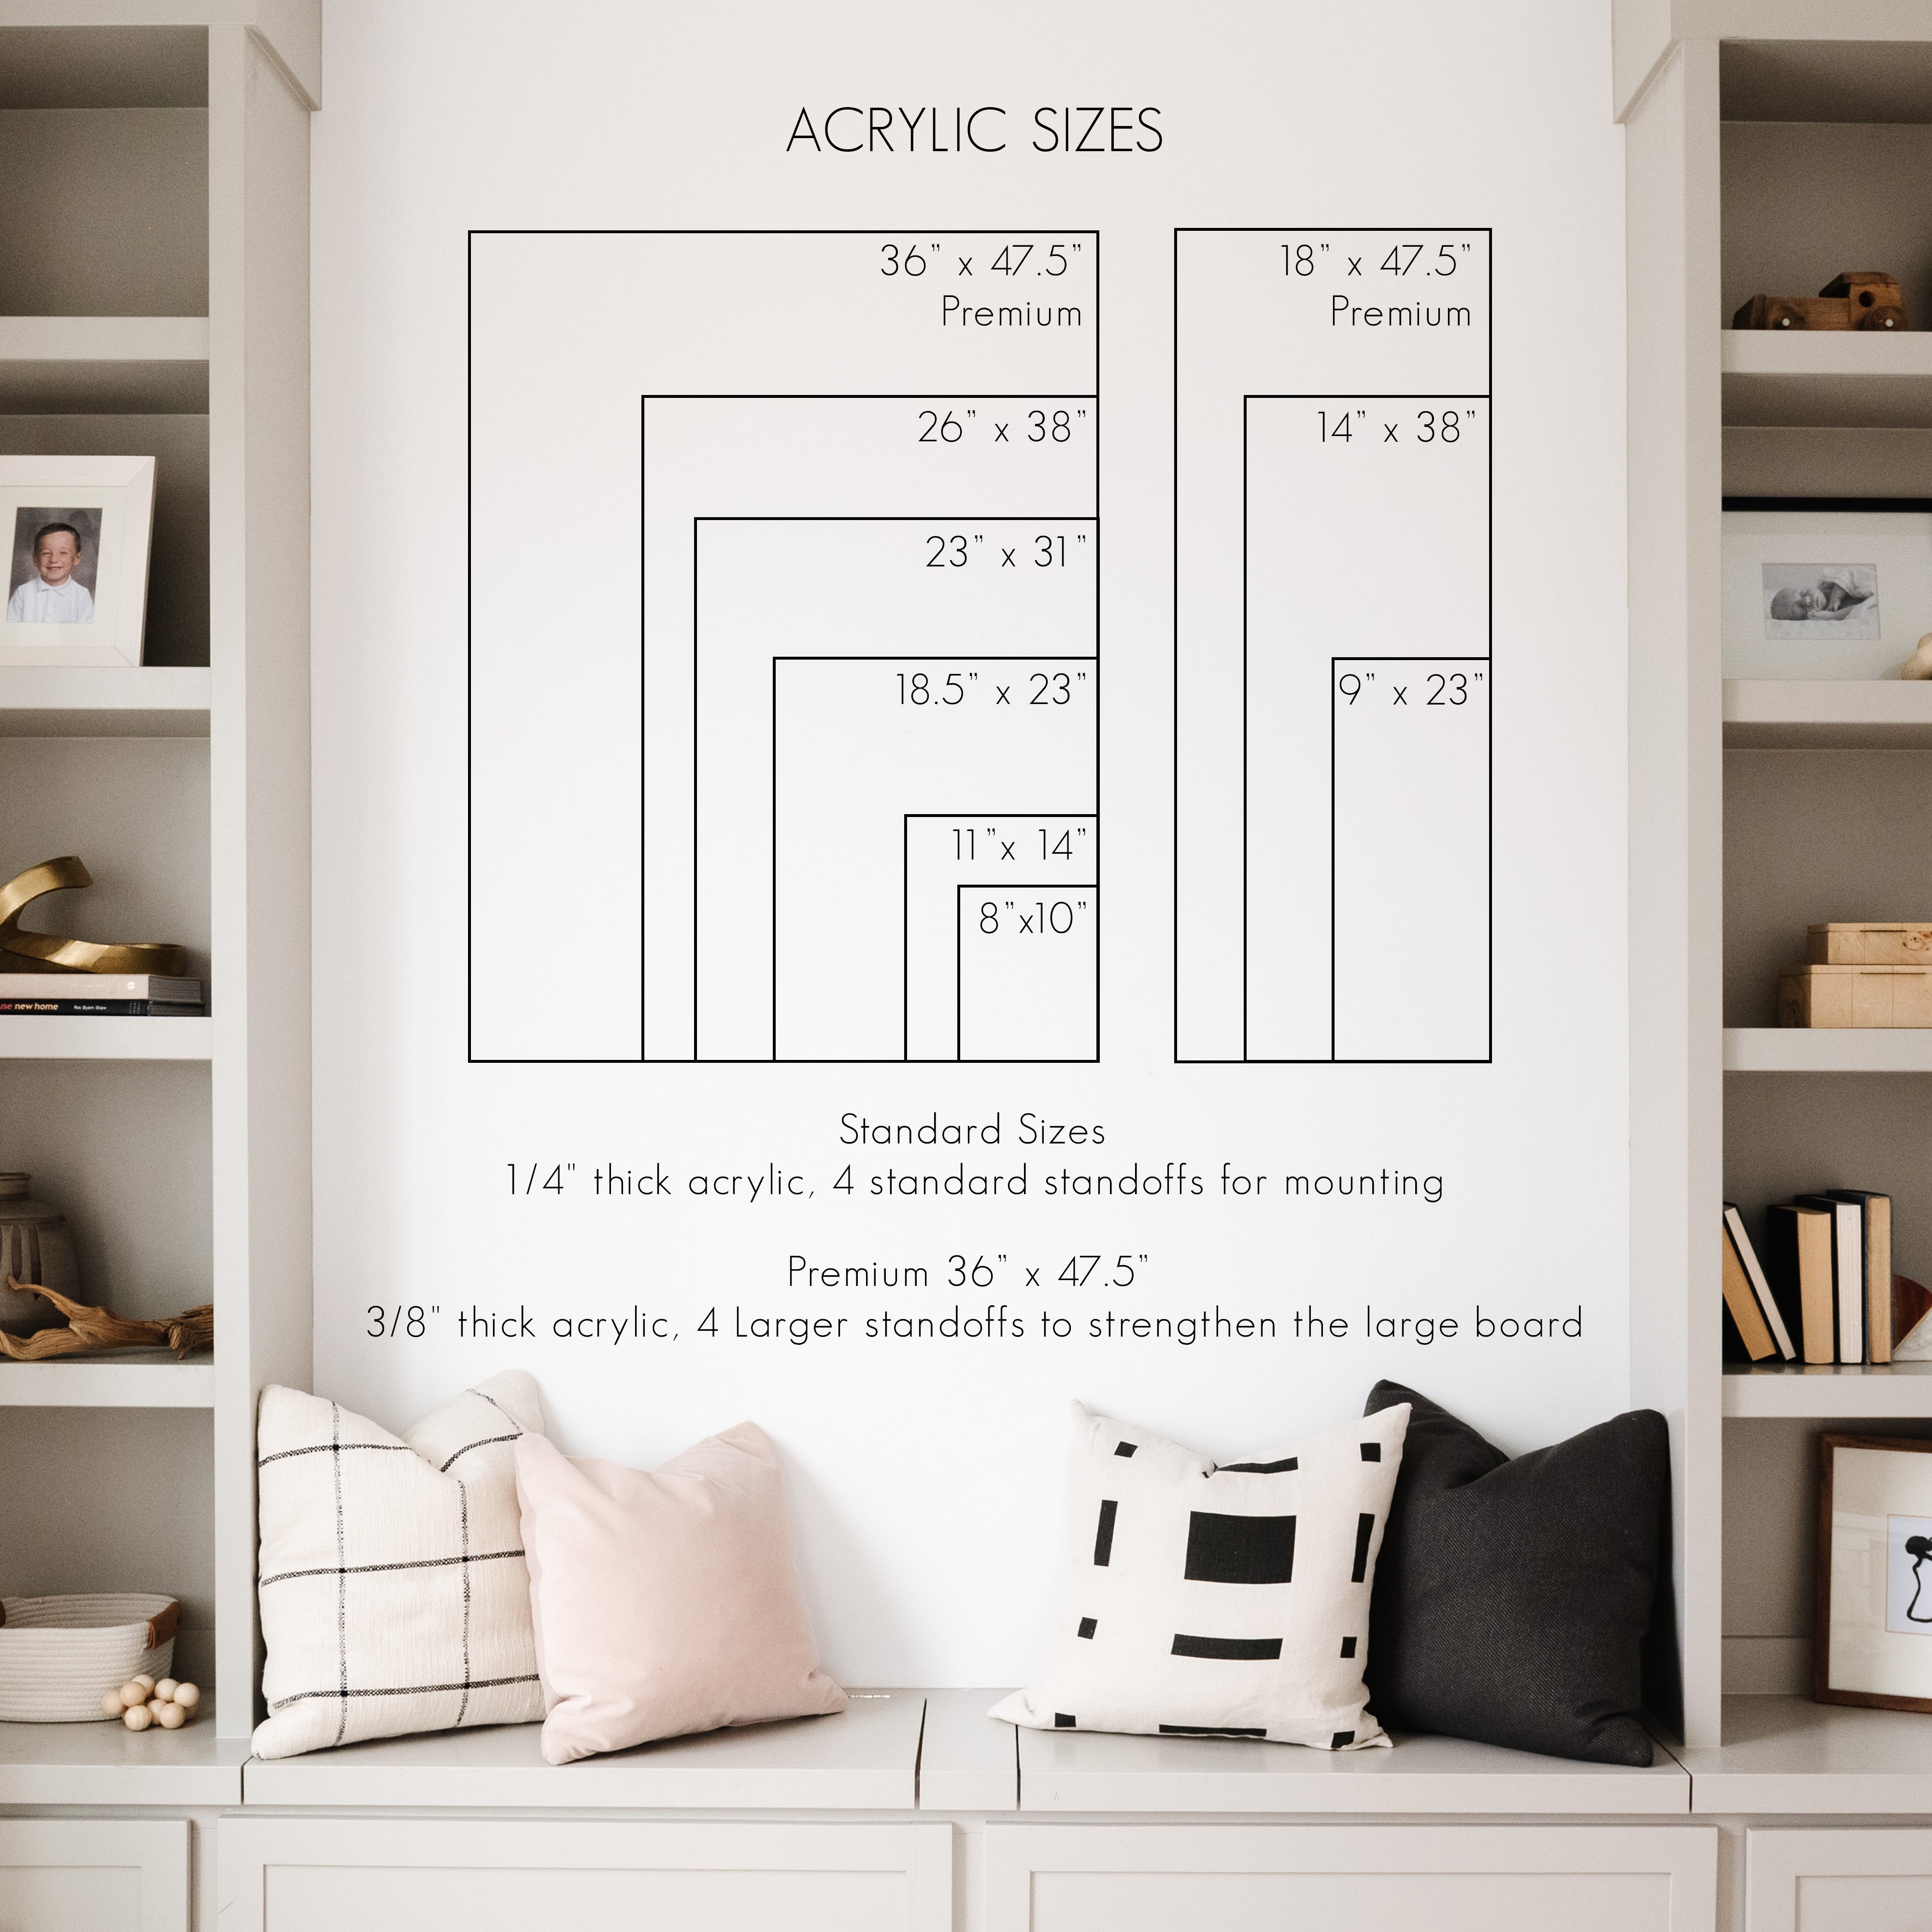 Monthly Frosted Acrylic Calendar + 2 Sections | Vertical Lucy